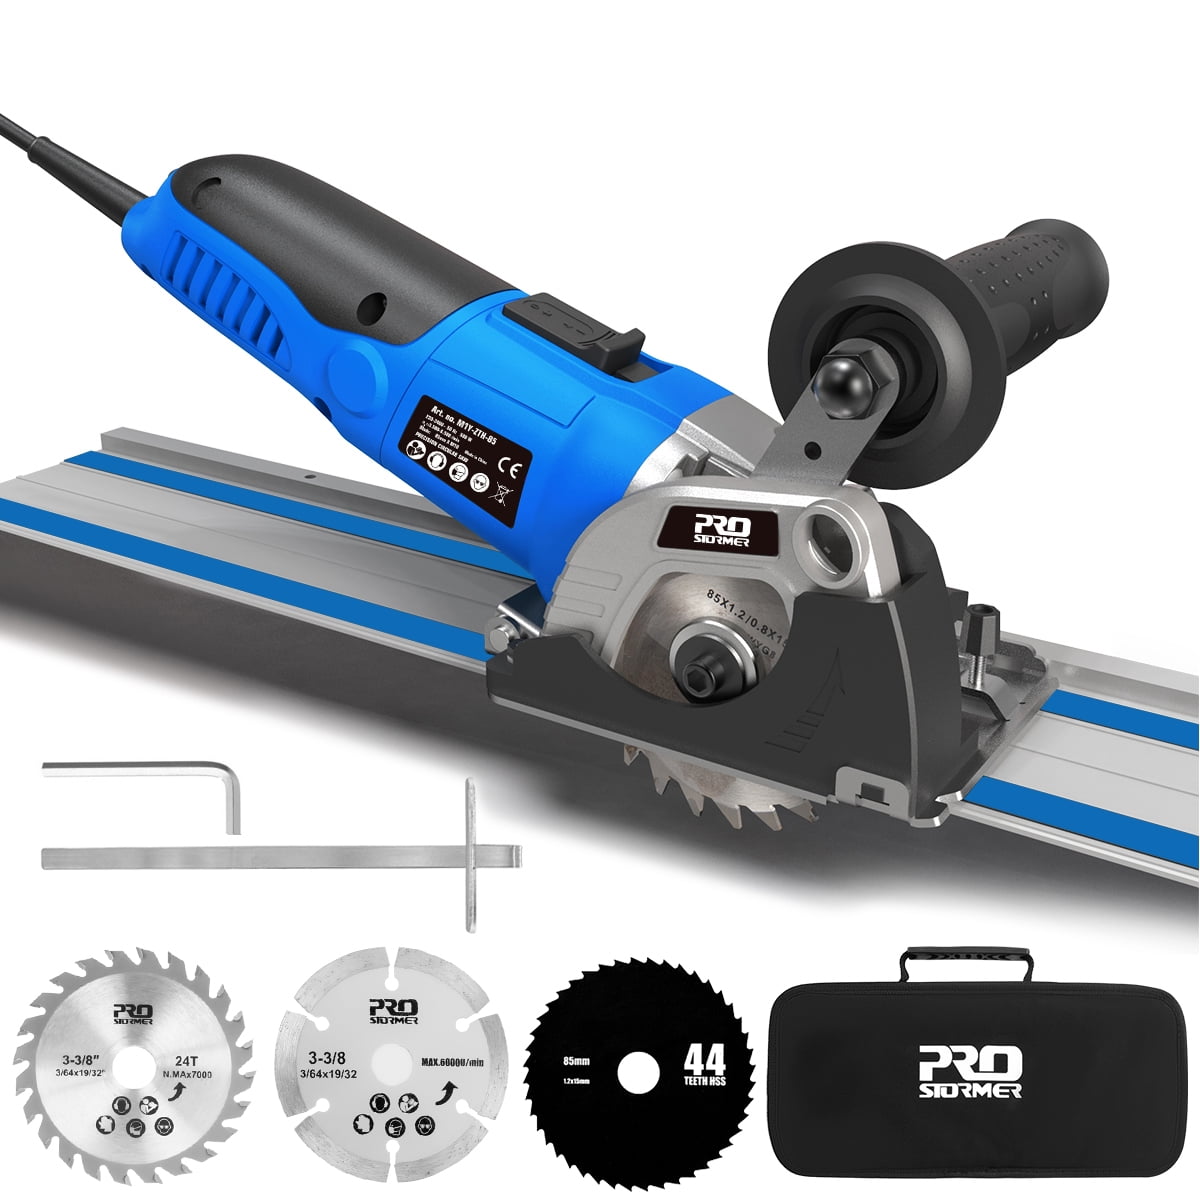 PROSTORMER Electric Variable Speed Mini Circular Saw, Compact Circular Saw, Mini Plunge Track Saw with 2 Guides and 3 Cutting Blades -